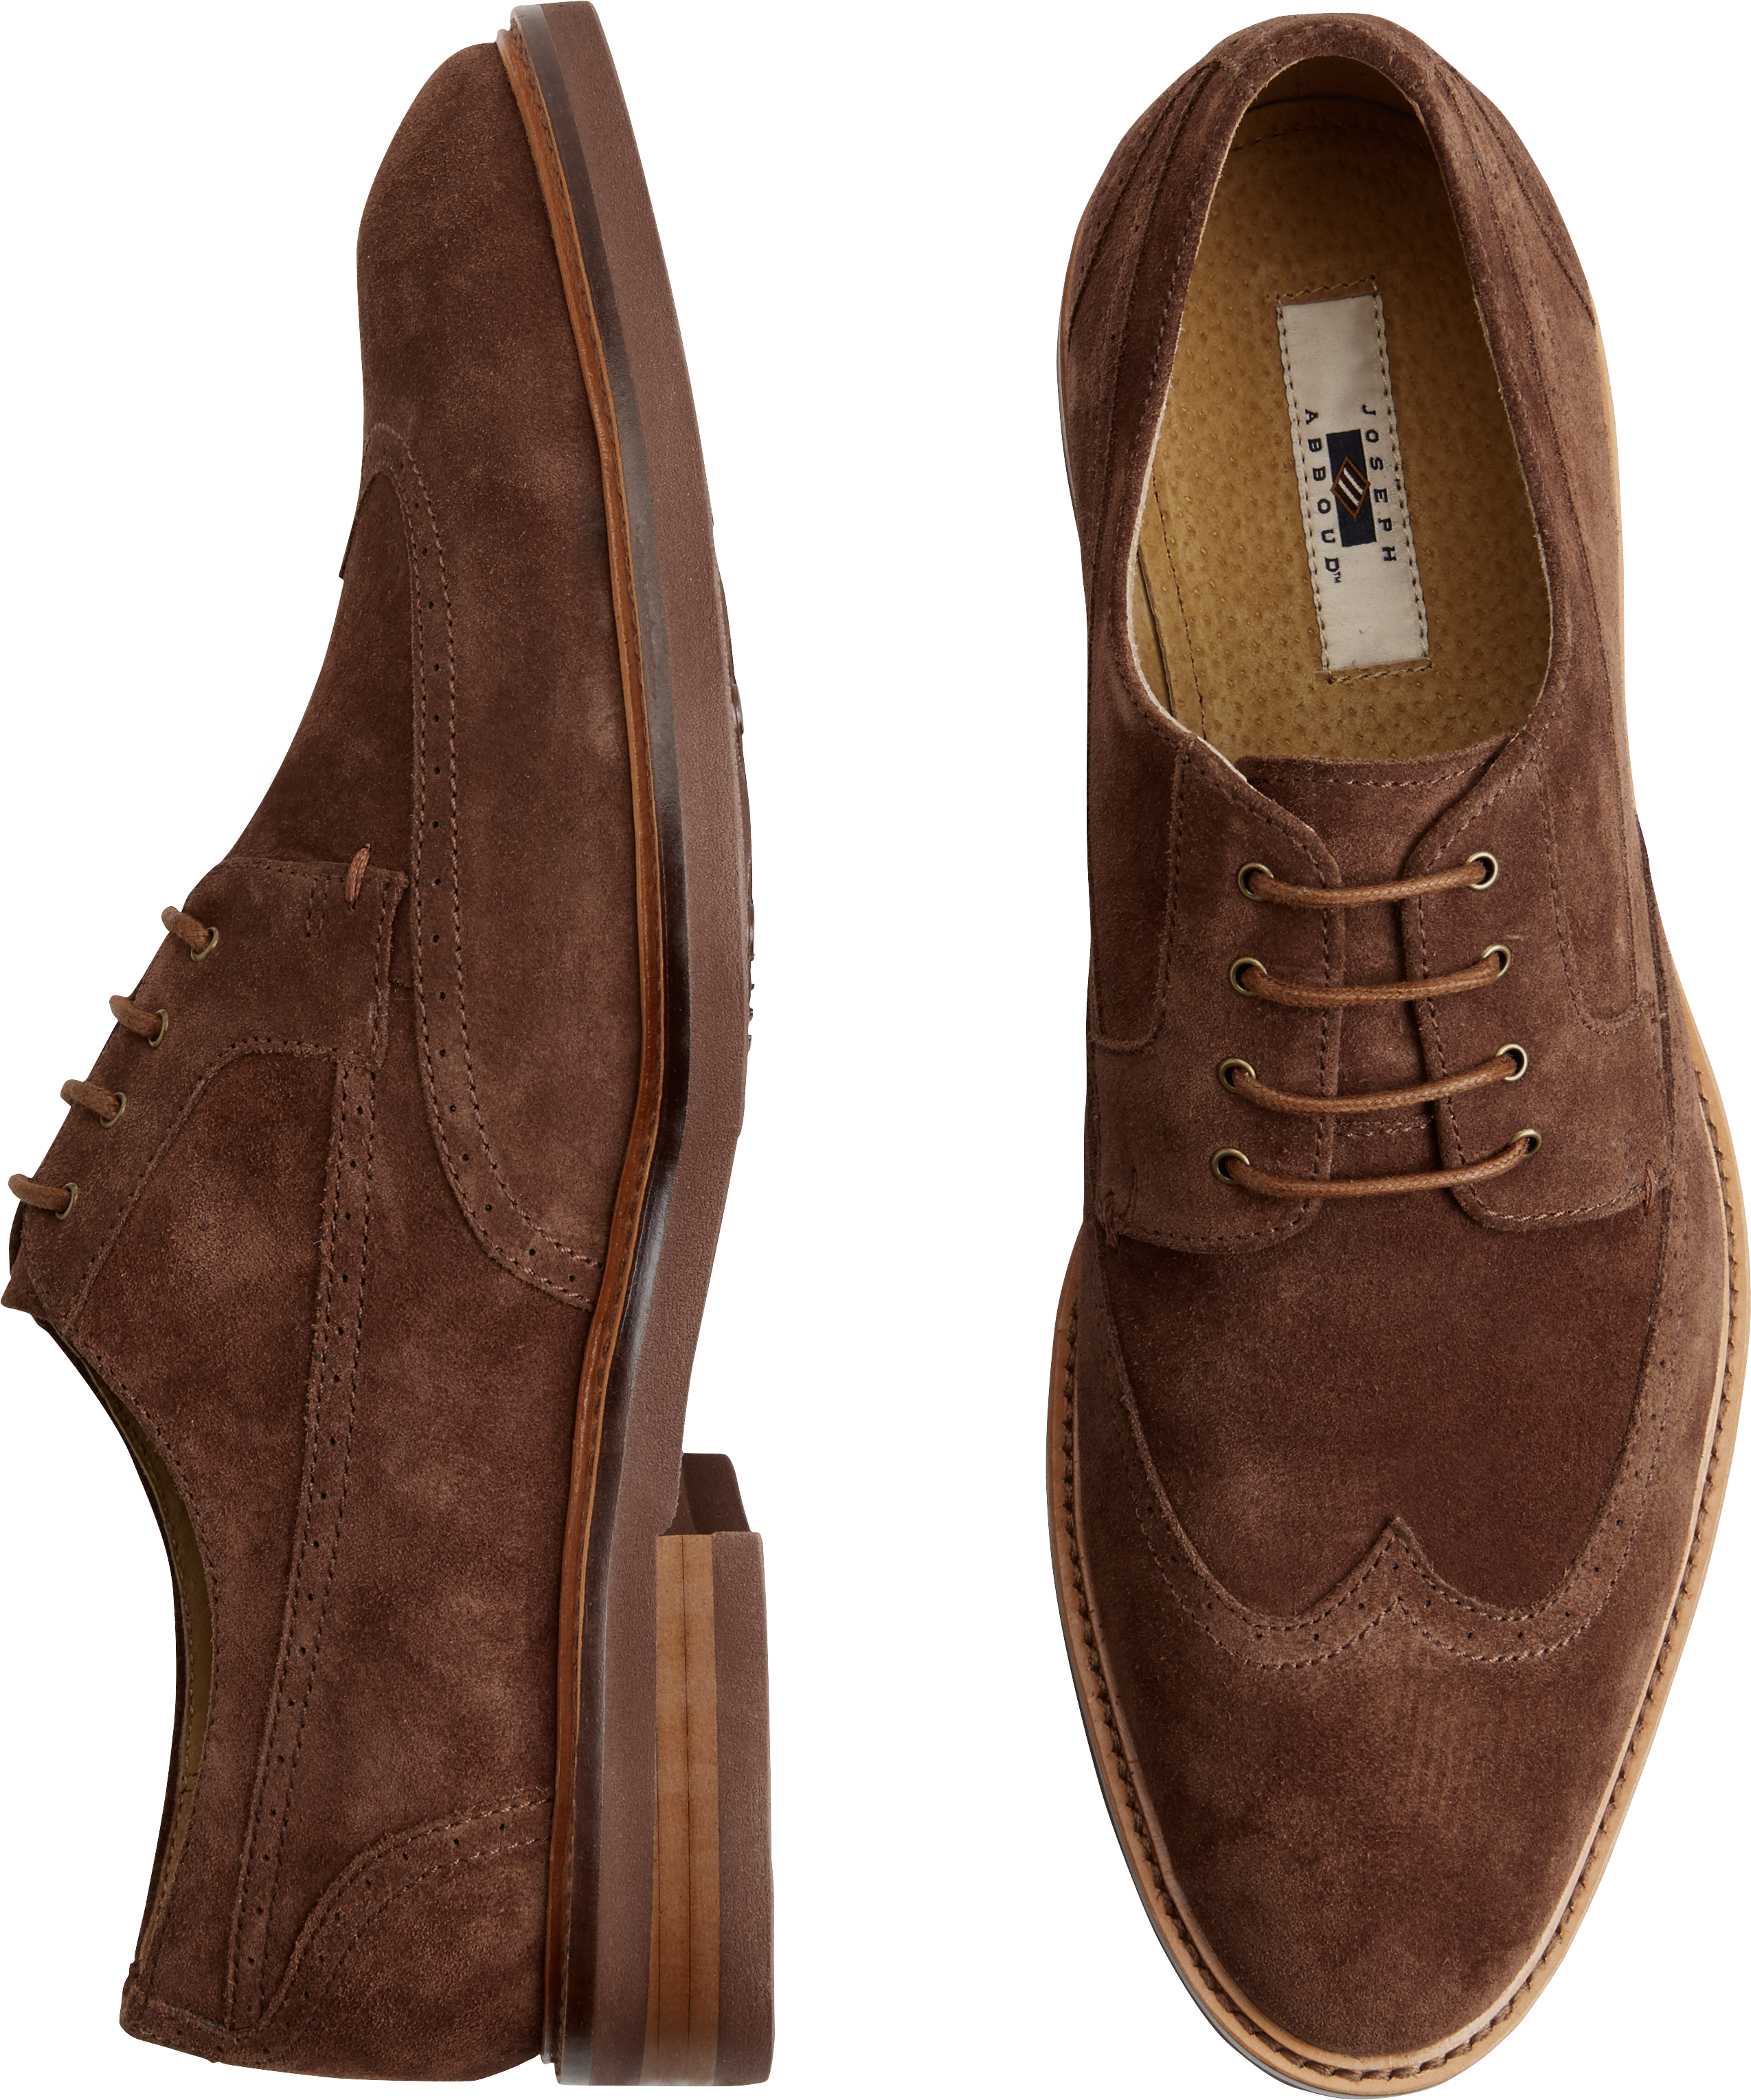 mens wingtip oxford shoes